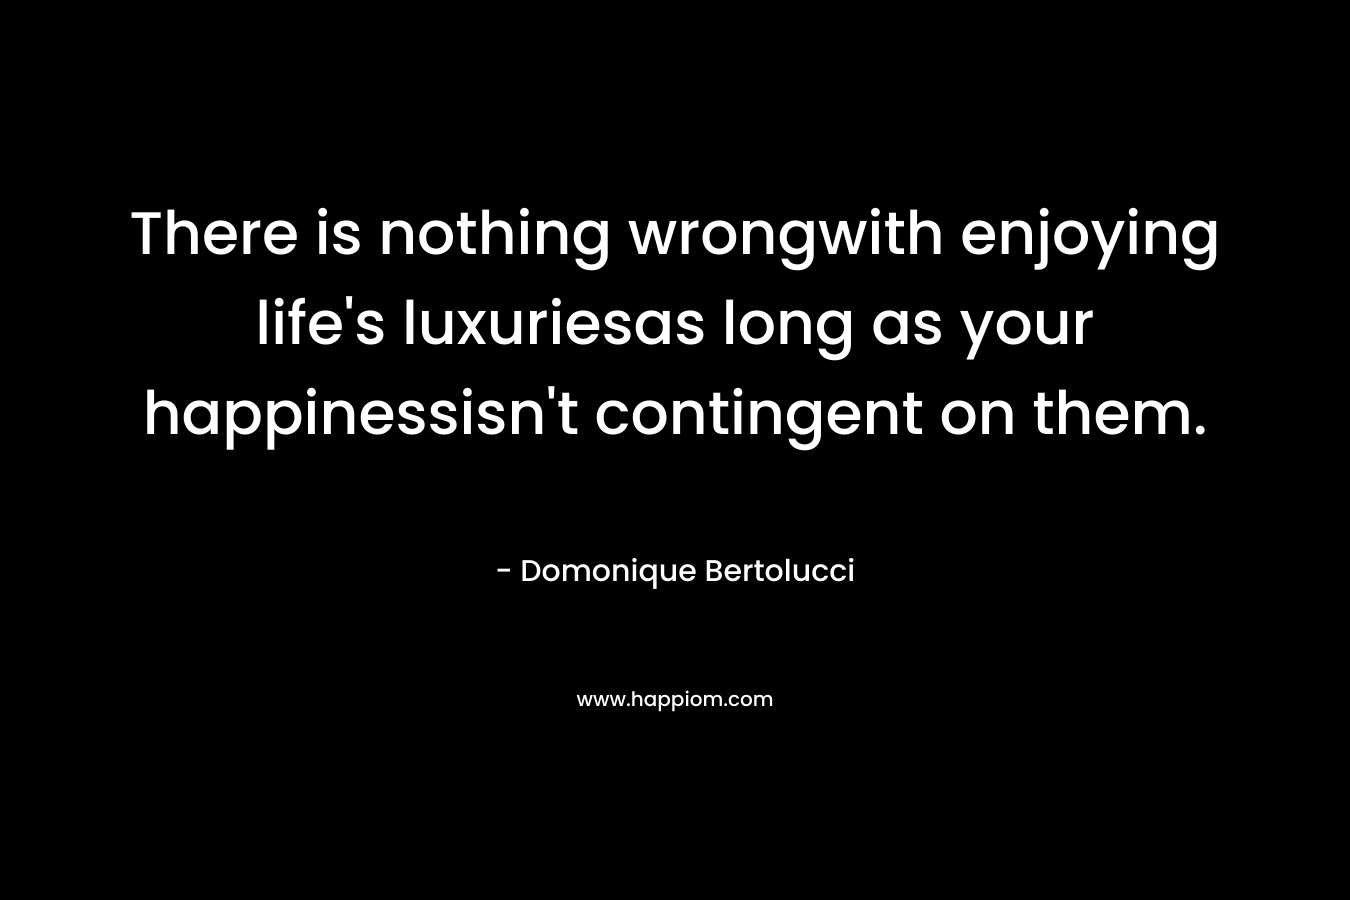 There is nothing wrongwith enjoying life's luxuriesas long as your happinessisn't contingent on them.